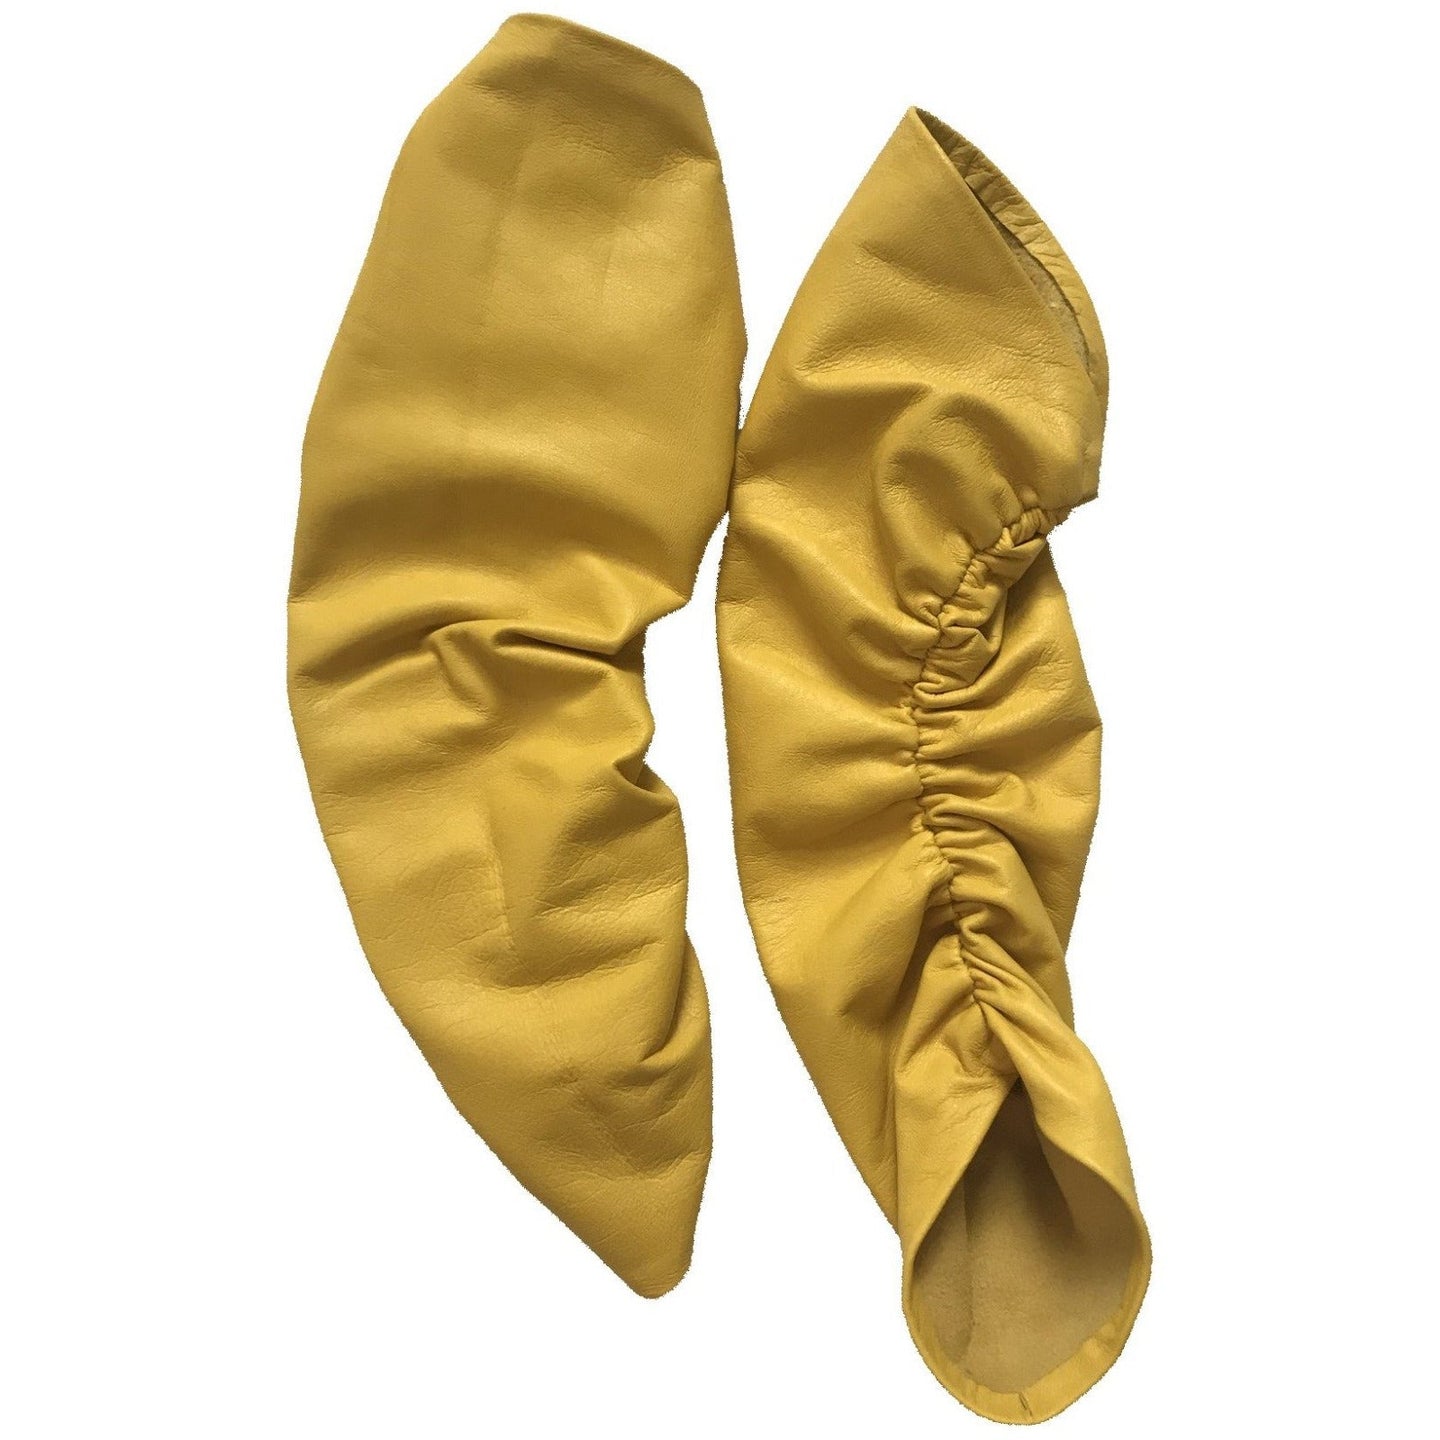 Yellow leather arm sleeves - Handmade Accessories